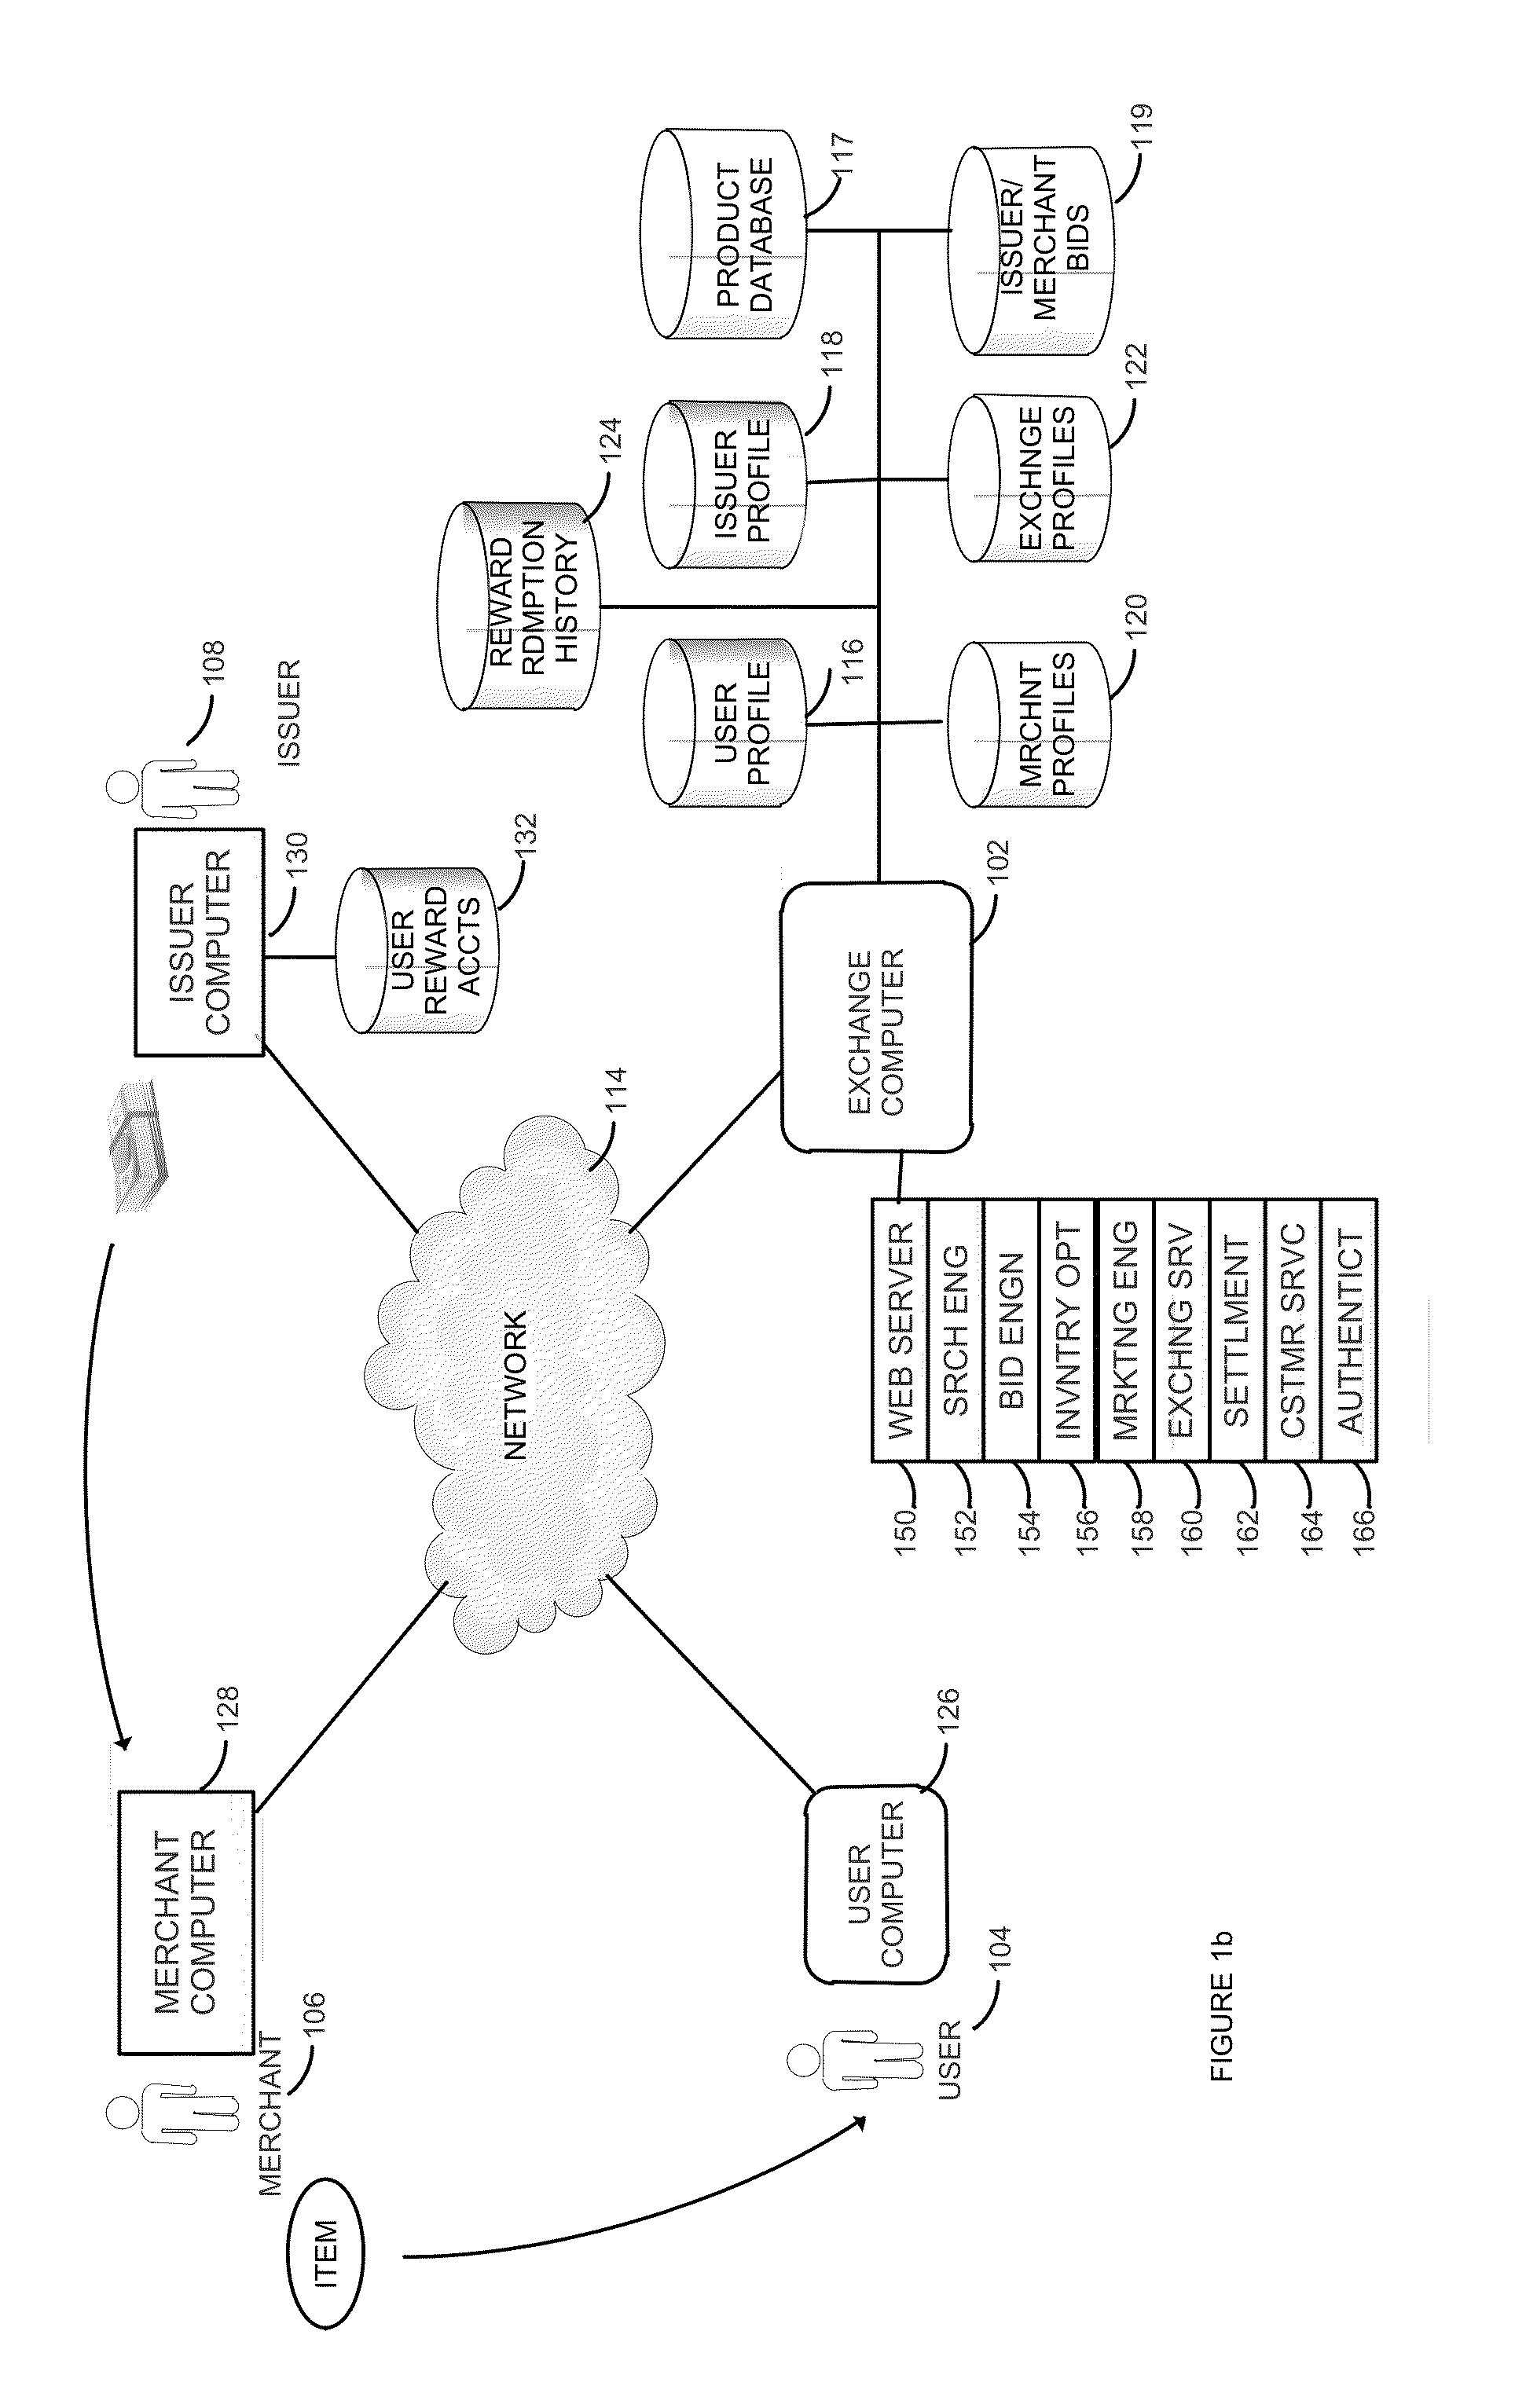 Reward exchange method and system implementing data collection and analysis